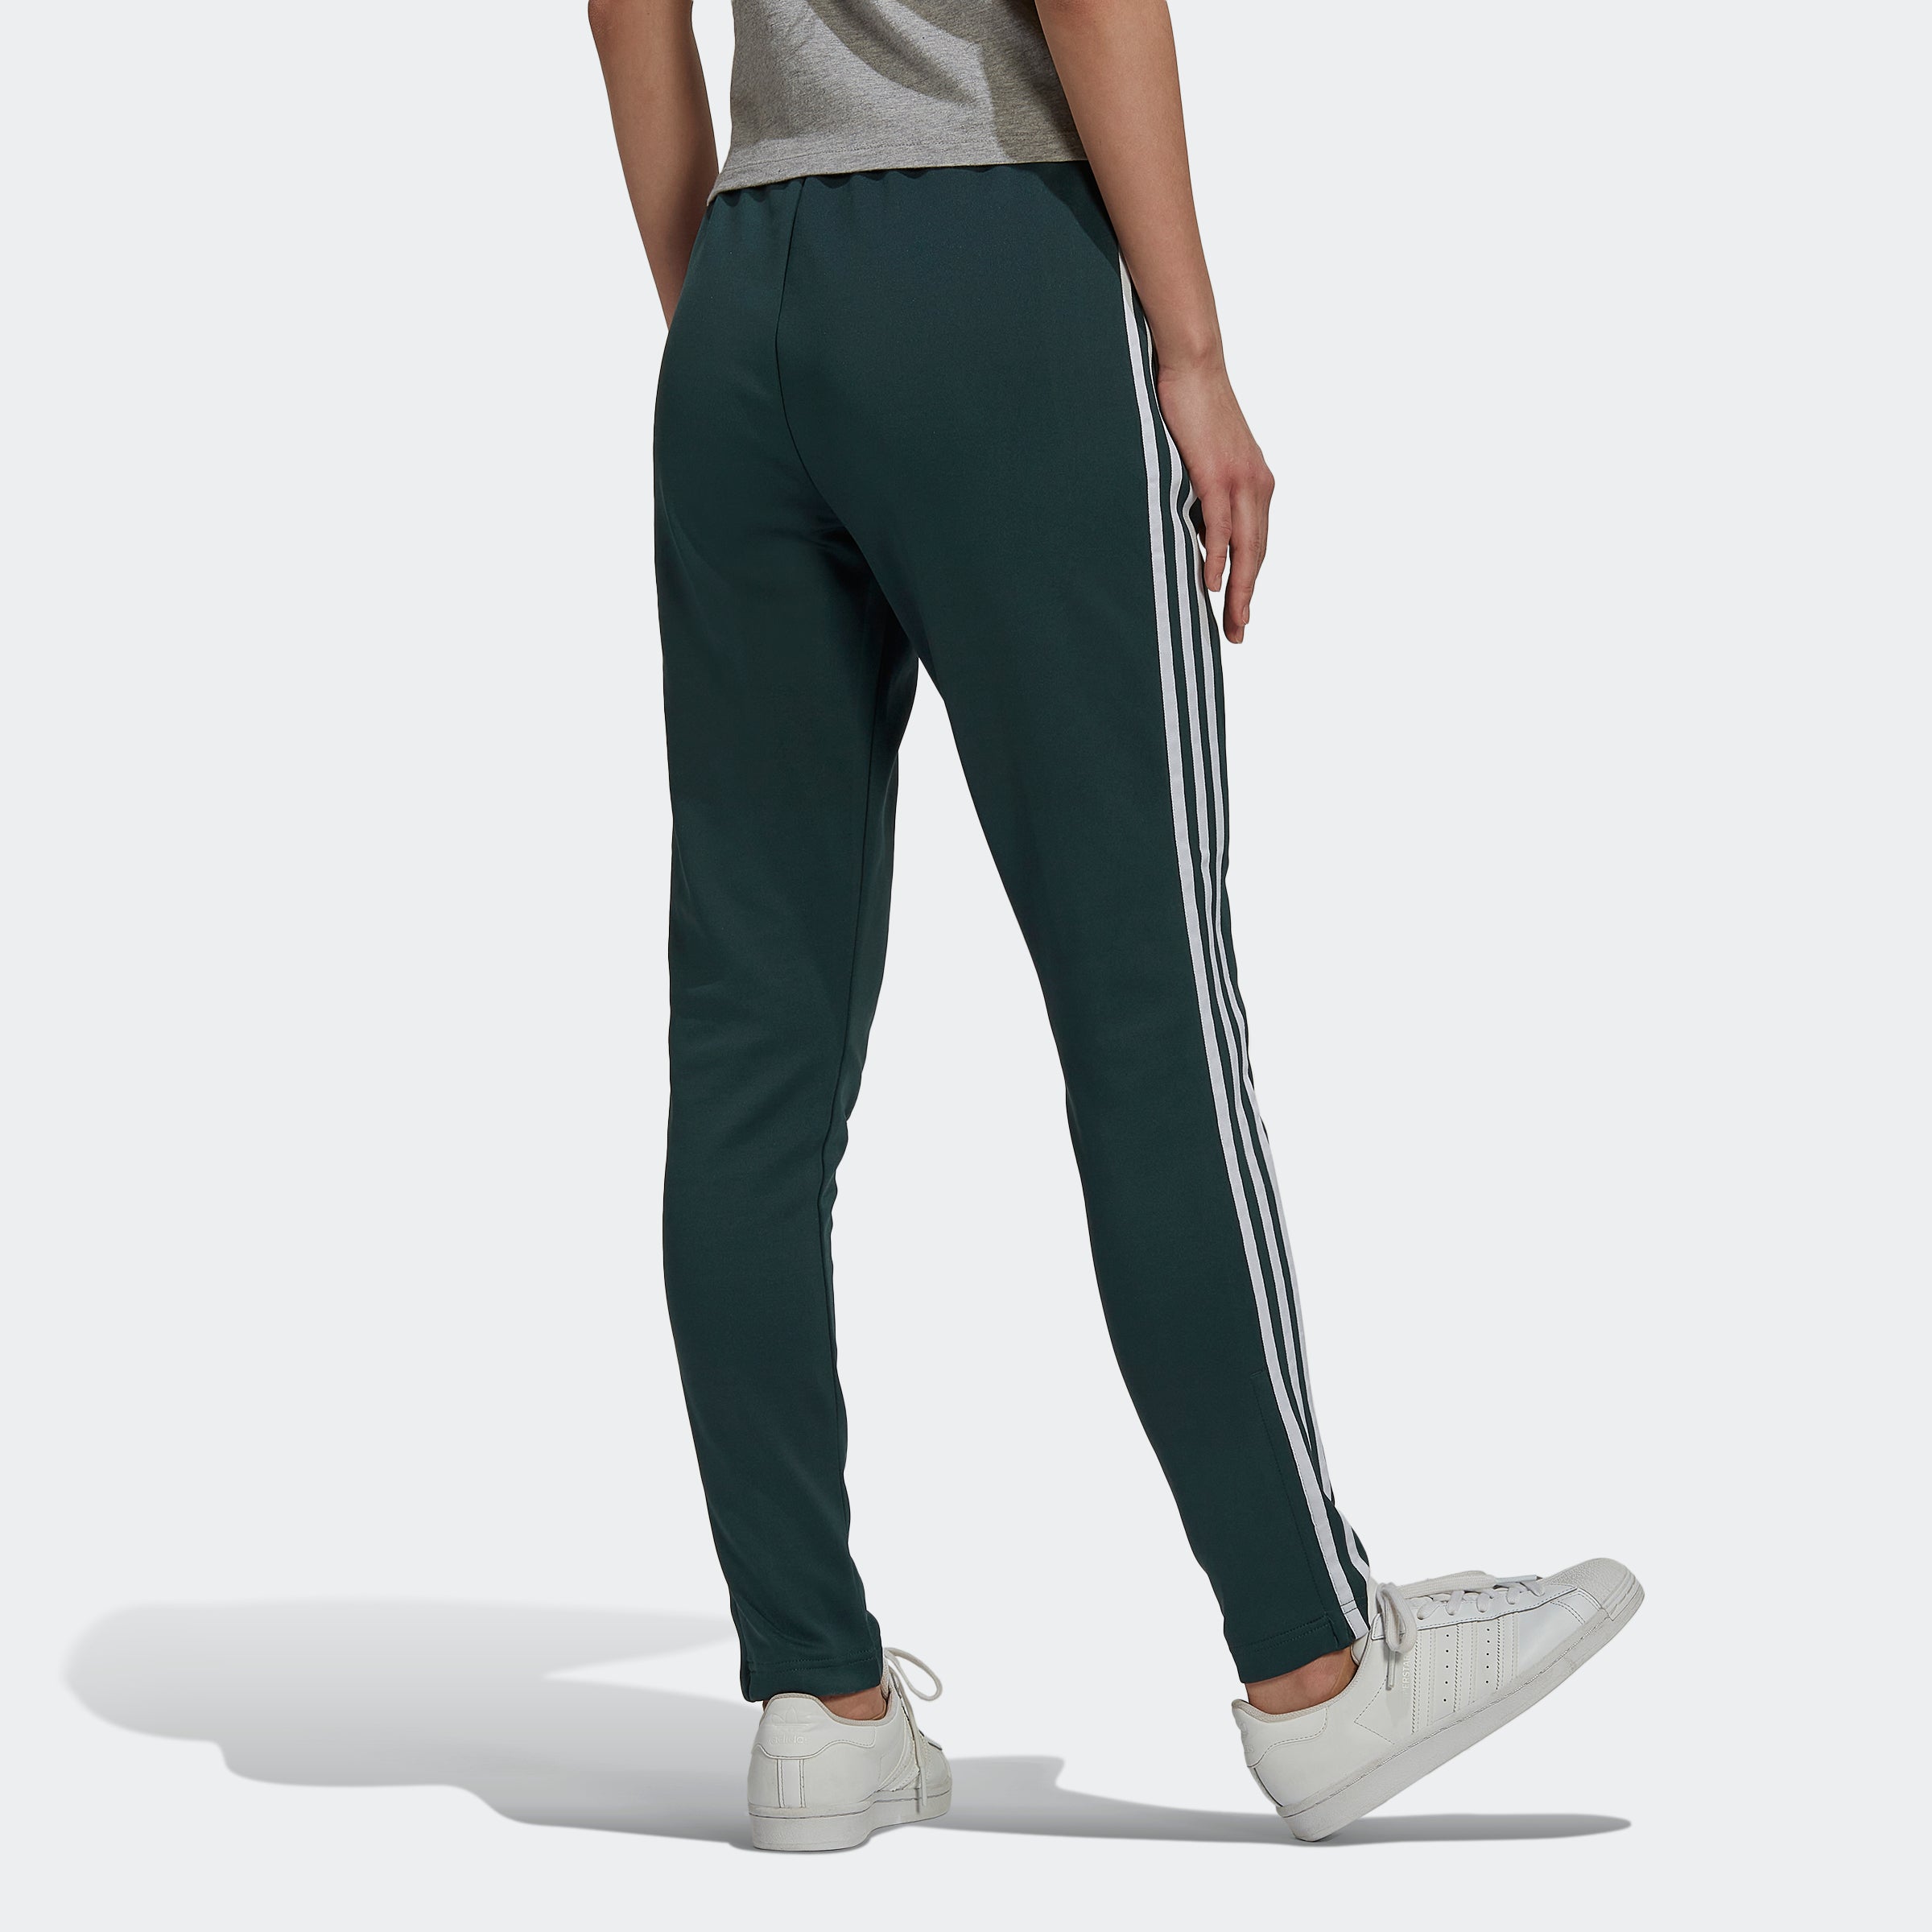 Mineral Sports Chicago Pants SST Women\'s City Green | Track adidas